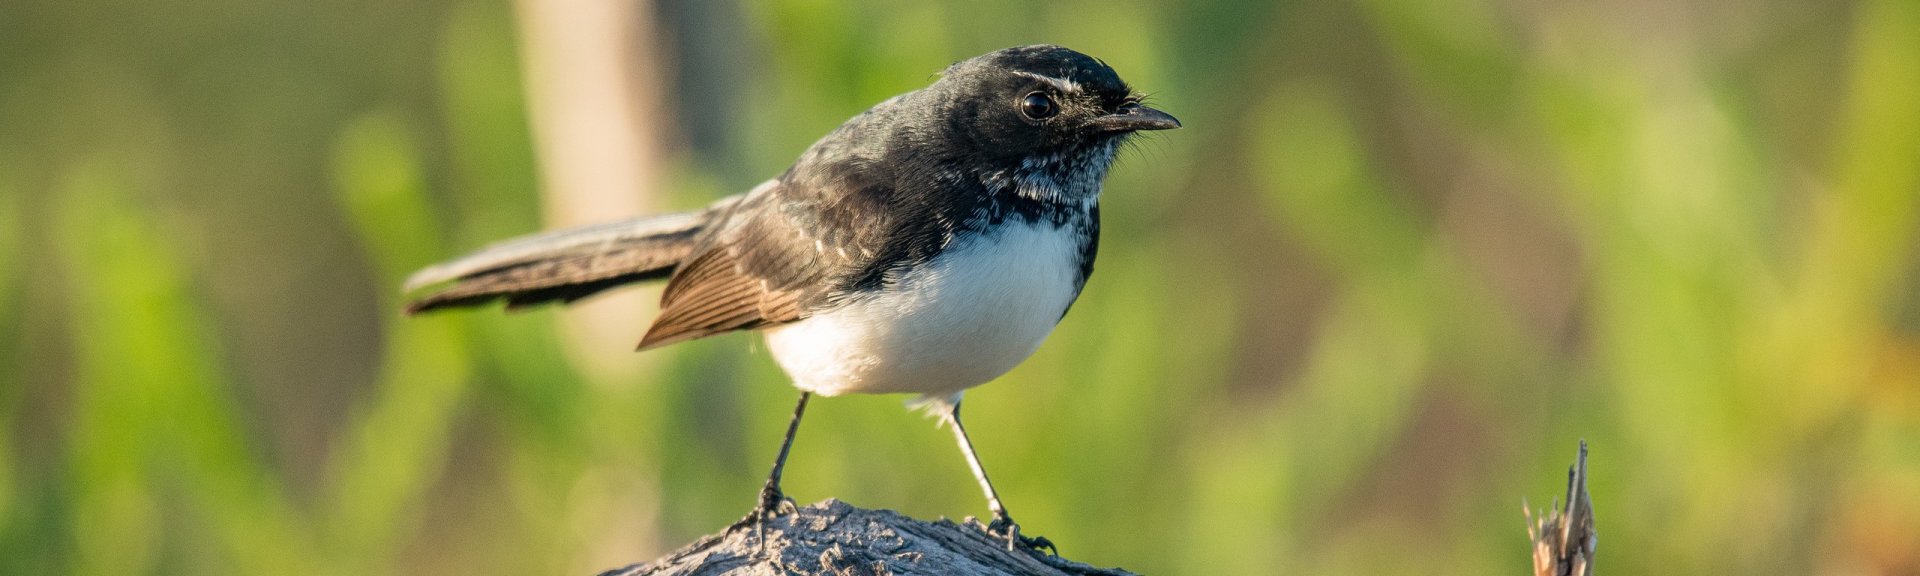 Willie wagtail. [Photo](https://www.flickr.com/photos/paul_e_balfe/34012707775): [Paul Balfe](https://www.flickr.com/photos/paul_e_balfe/) / [CC BY 2.0](https://creativecommons.org/licenses/by/2.0/)